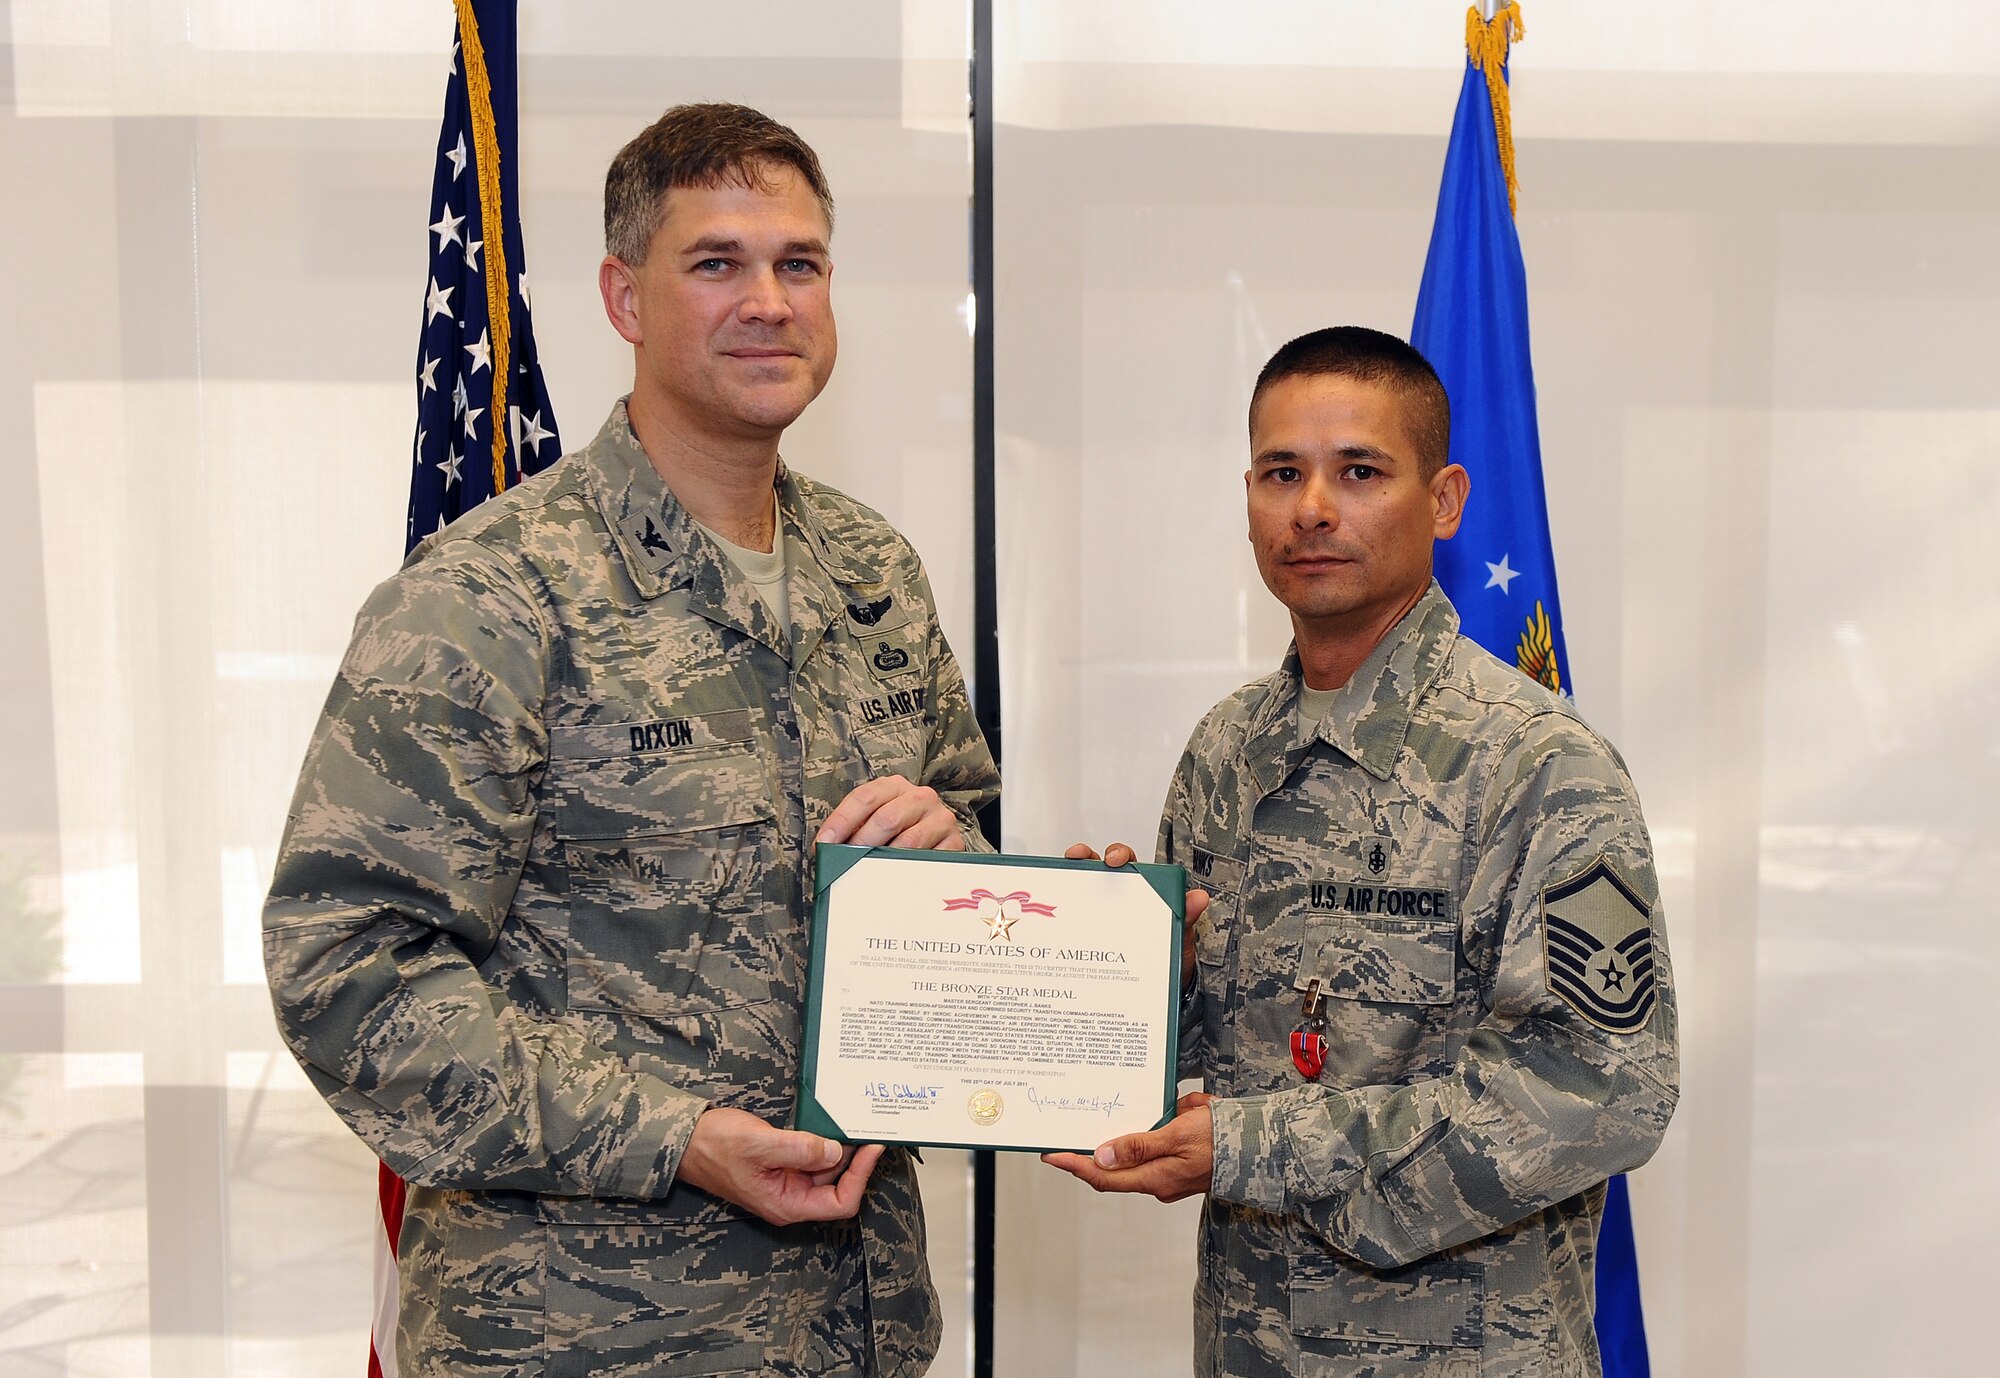 U.S. Air Force Col. Kevin D. Dixon, 55th Wing vice commander, presents a Bronze Star certificate to Master Sgt. Christopher Banks at a ceremony held in the 55th Medical Group's dining facility, Offutt Air Force Base, Neb., Sept. 27. Banks earned the medal for his heroic acts performed under extreme real world conditions in Afghanistan.  (U.S. Air Force photo by Josh Plueger/Released).